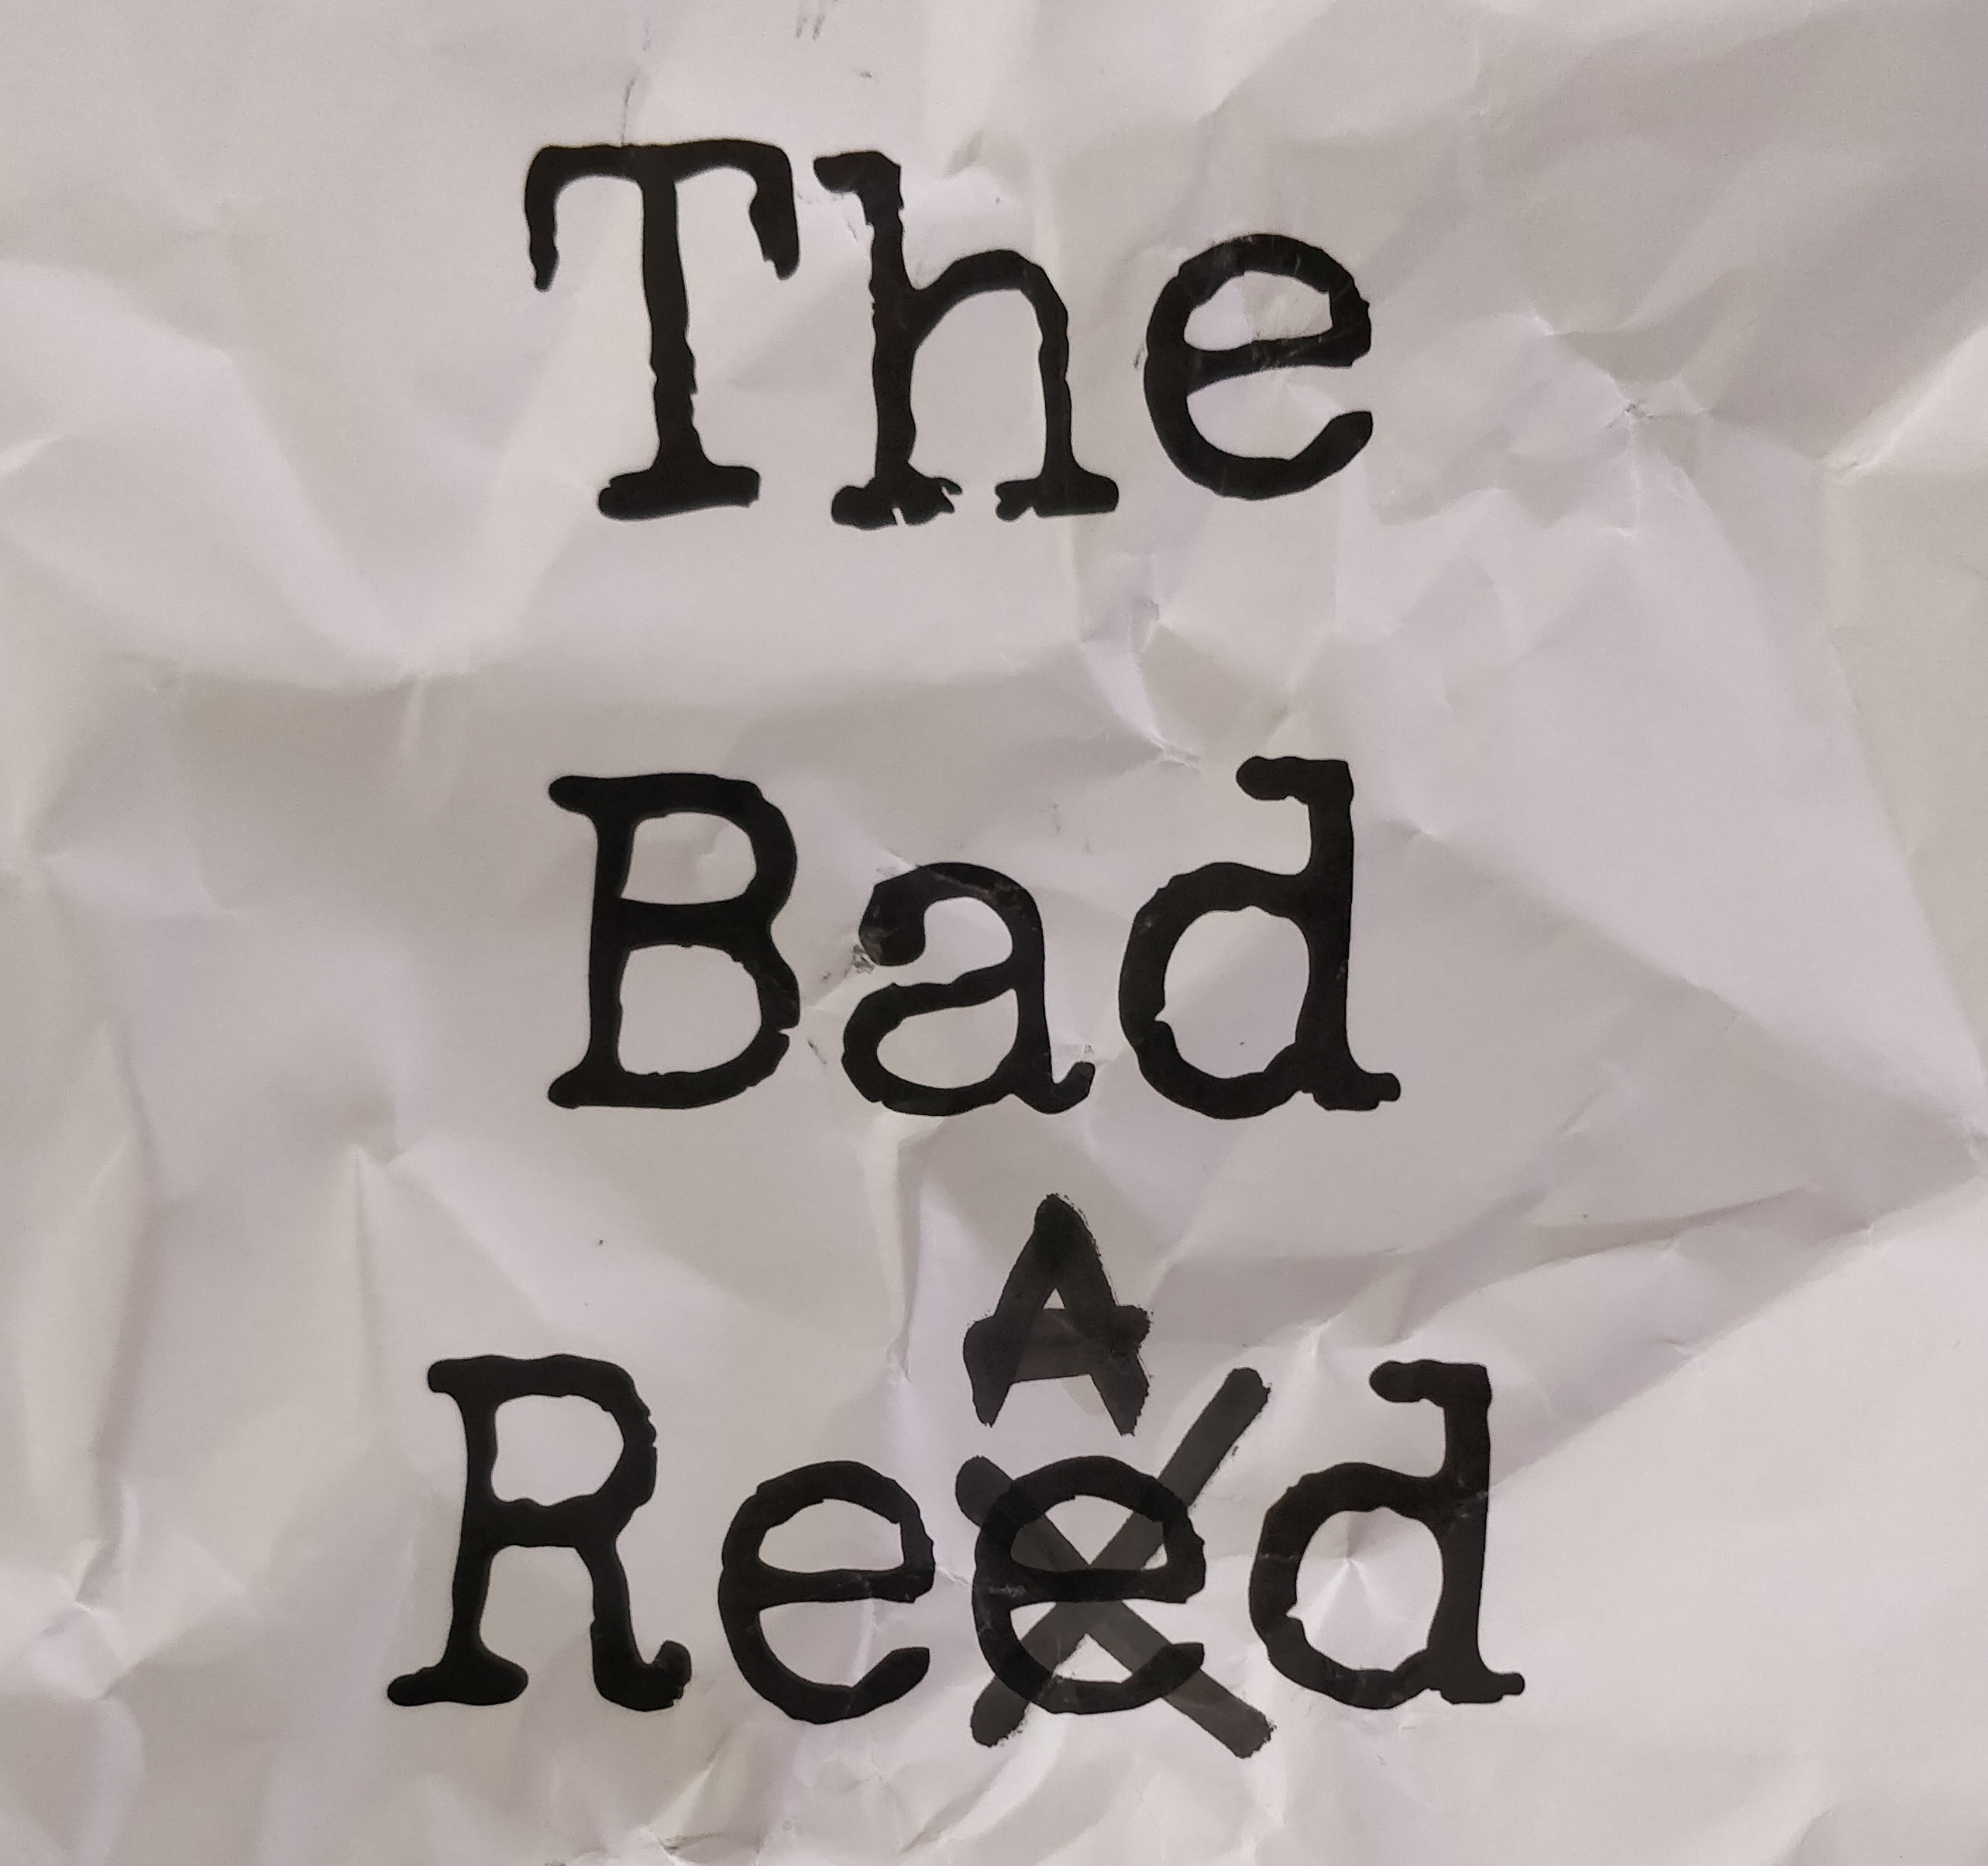 The Bad Read